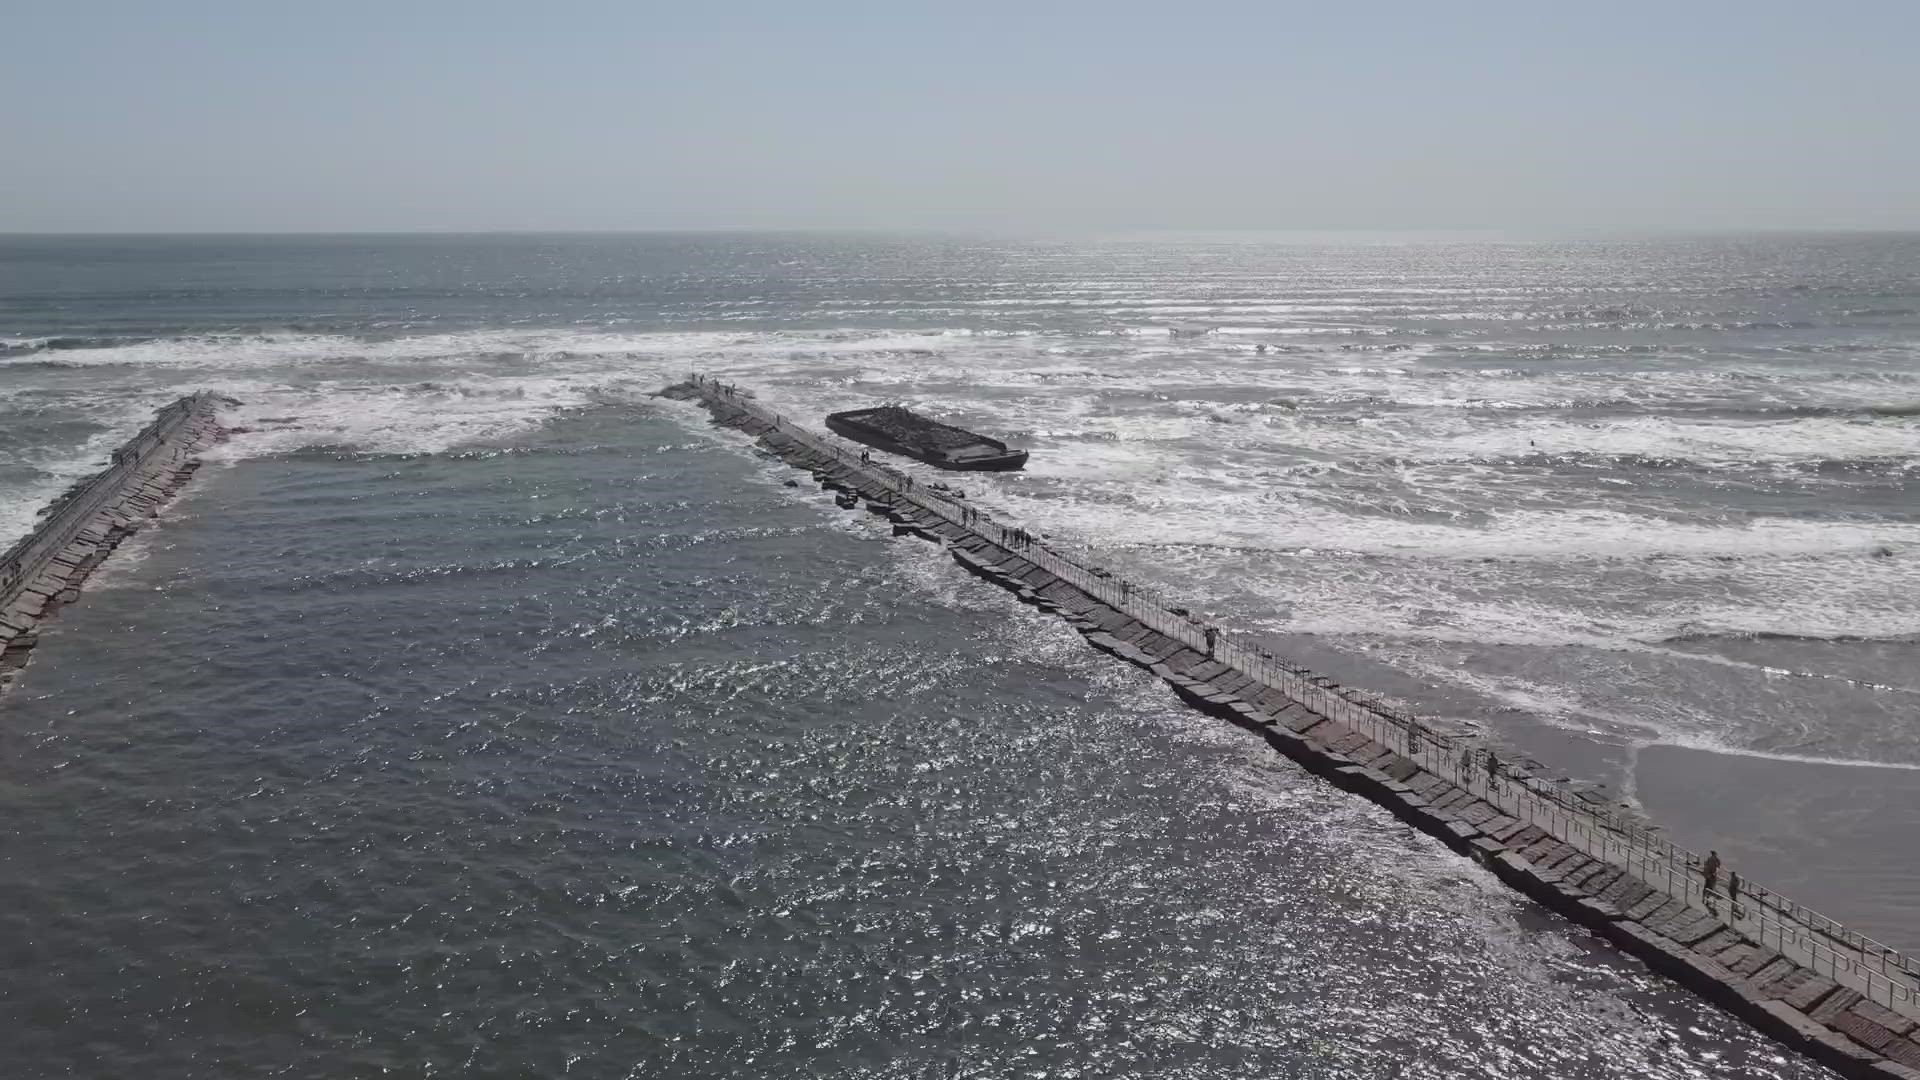 The Coast Guard said they are aware of the barge near the jetties.